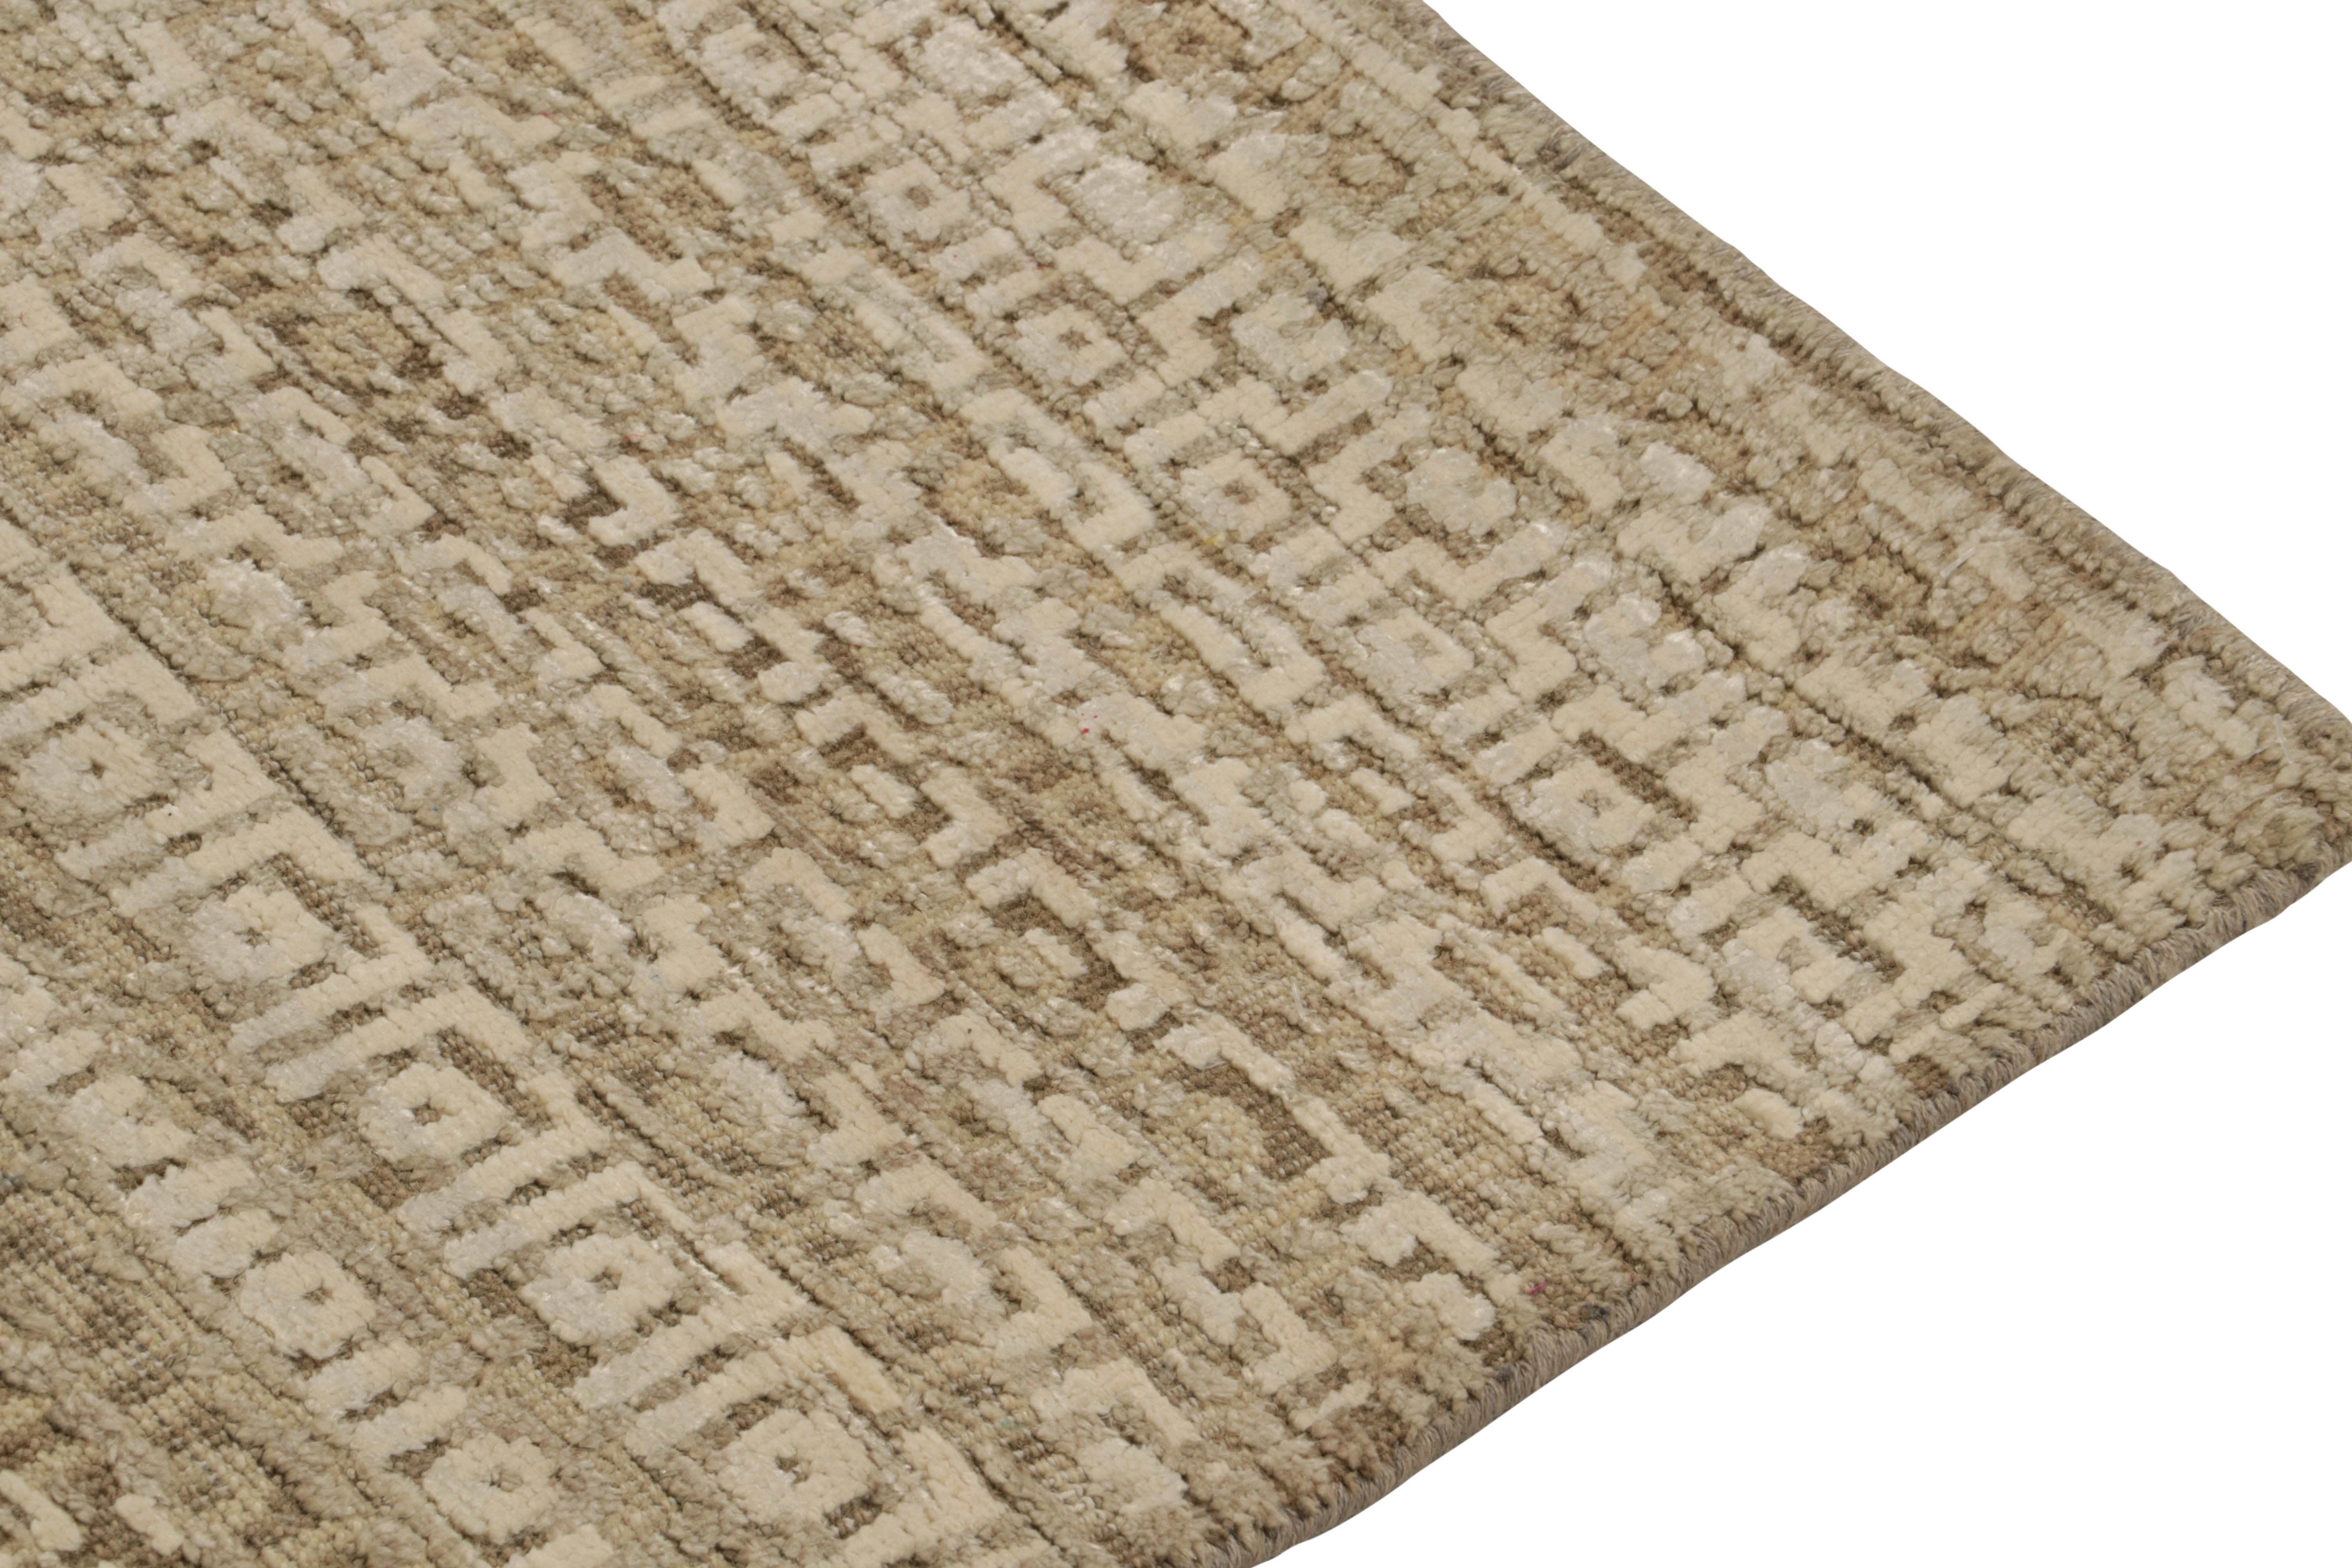 Rug & Kilim’s Modern Textural Runner in Beige-Brown and White Geometric Patterns In New Condition For Sale In Long Island City, NY